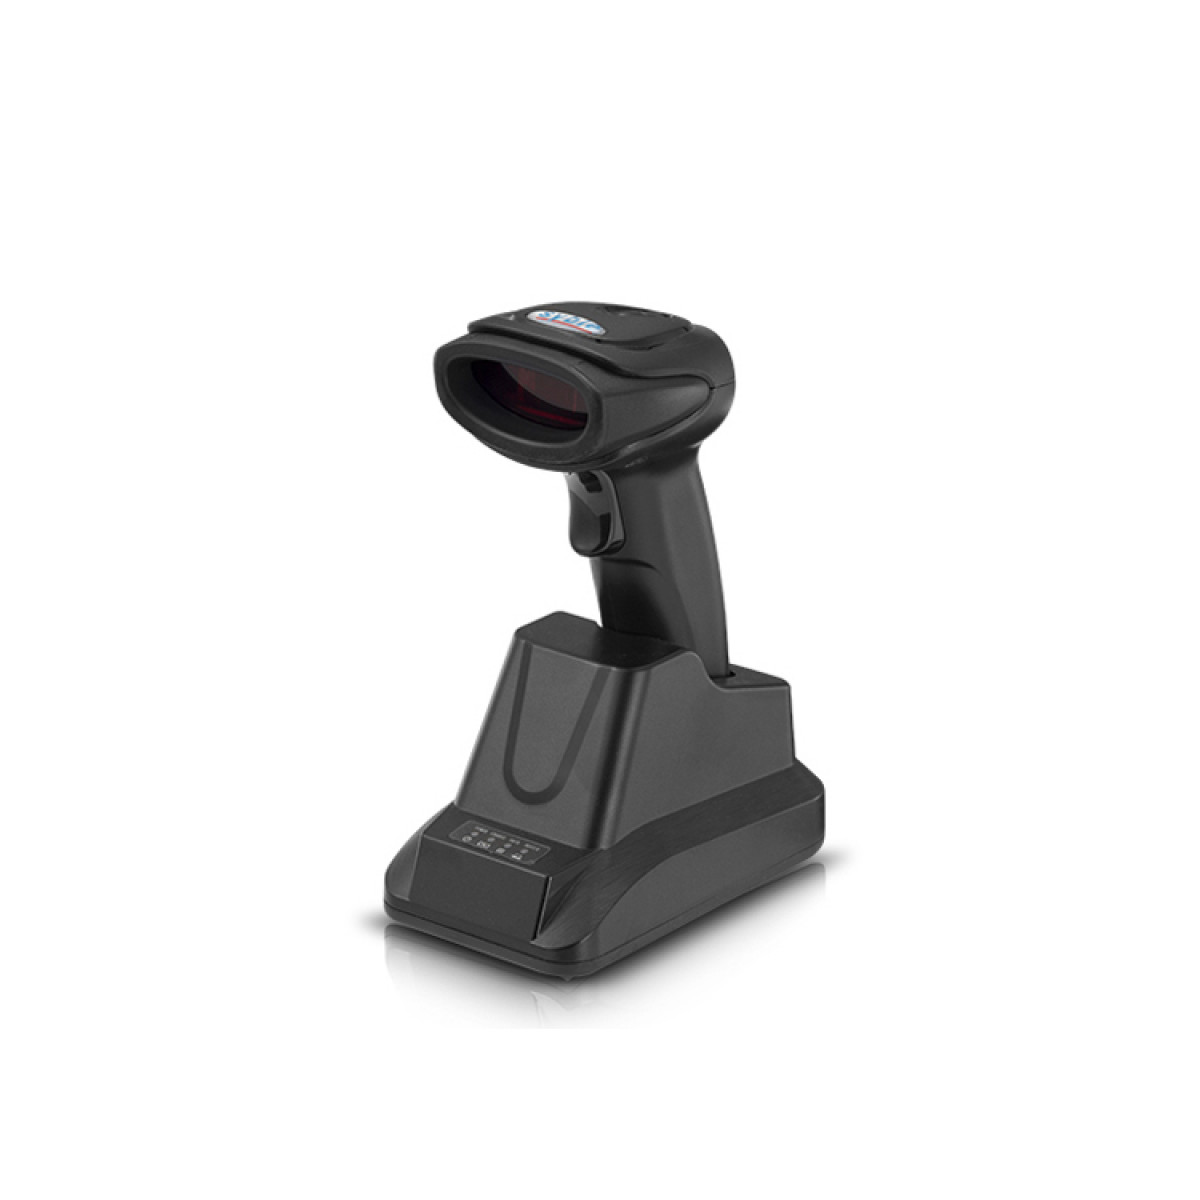 All You Need to Know about a Bluetooth Barcode Scanner